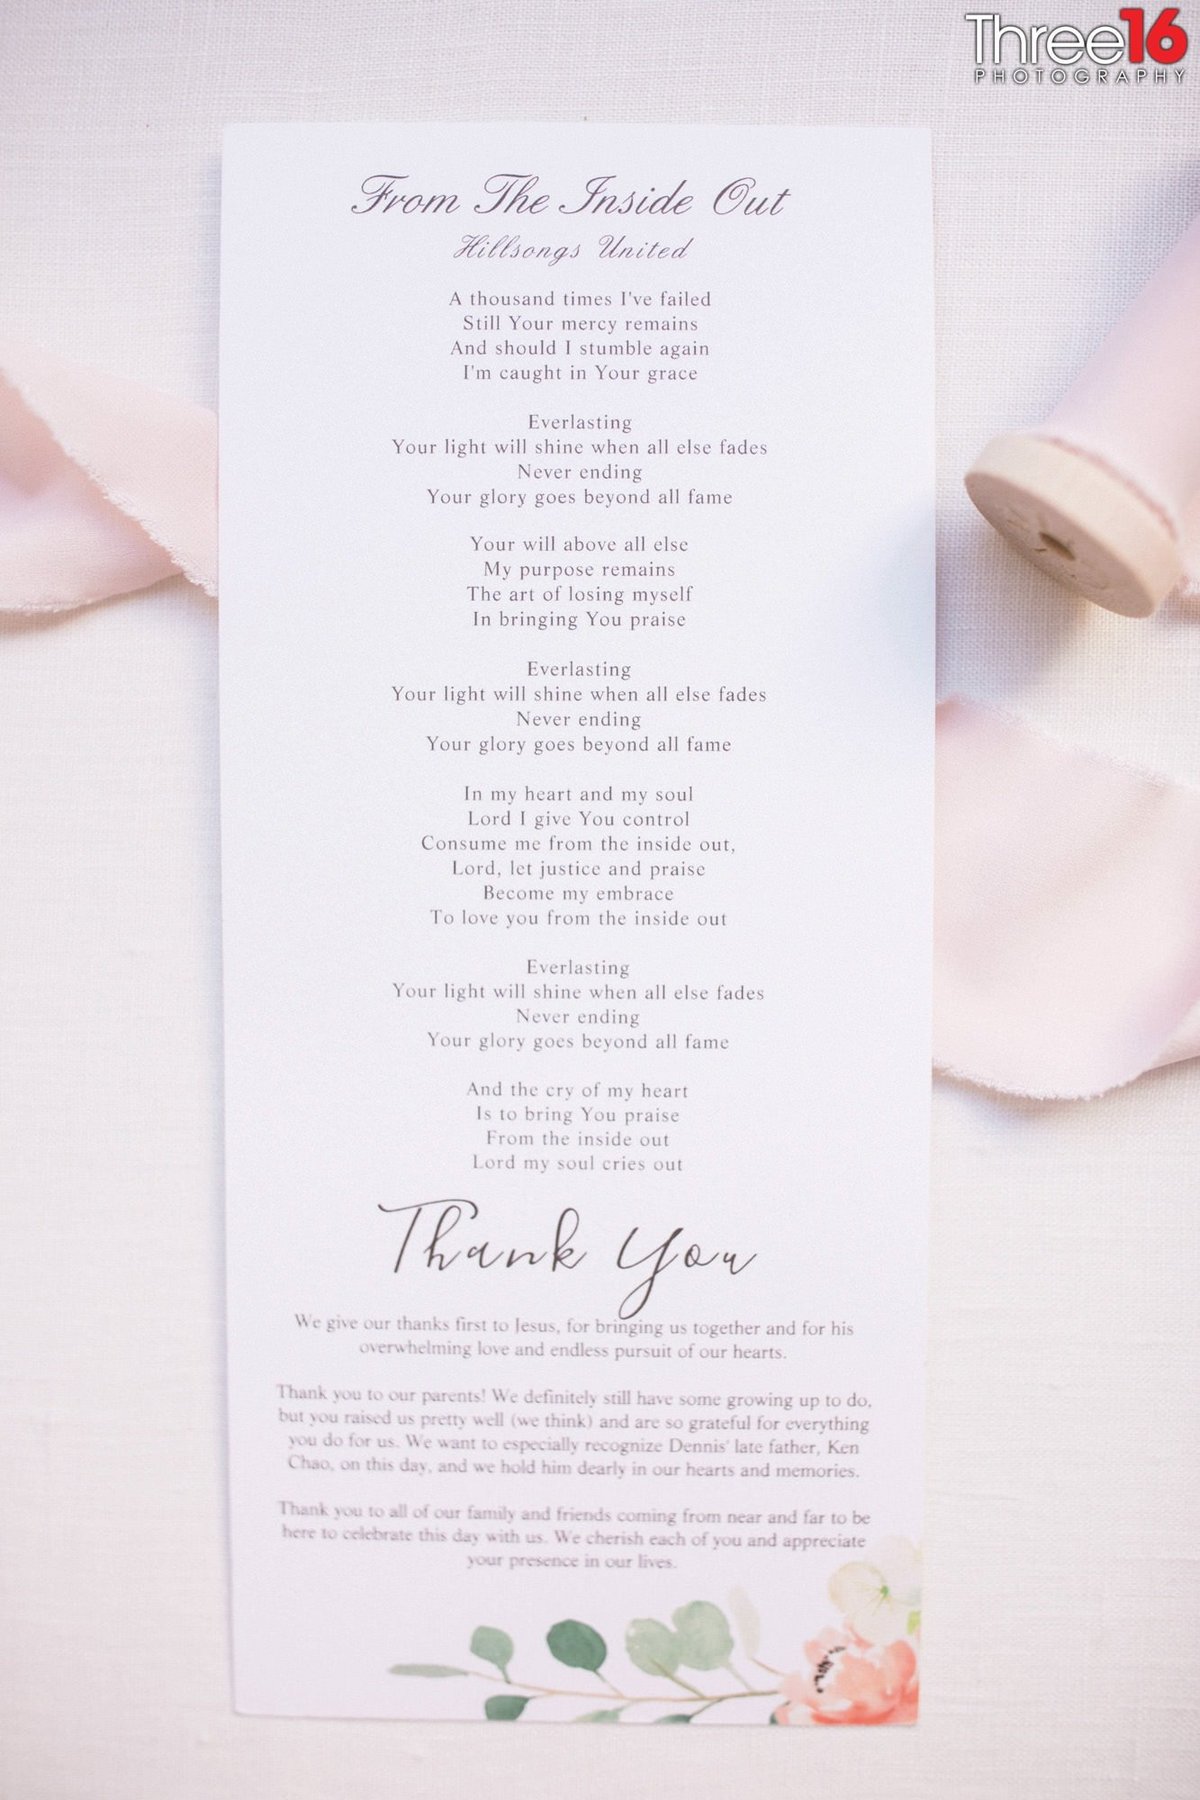 Bride and Groom's Thank You Card to their guests